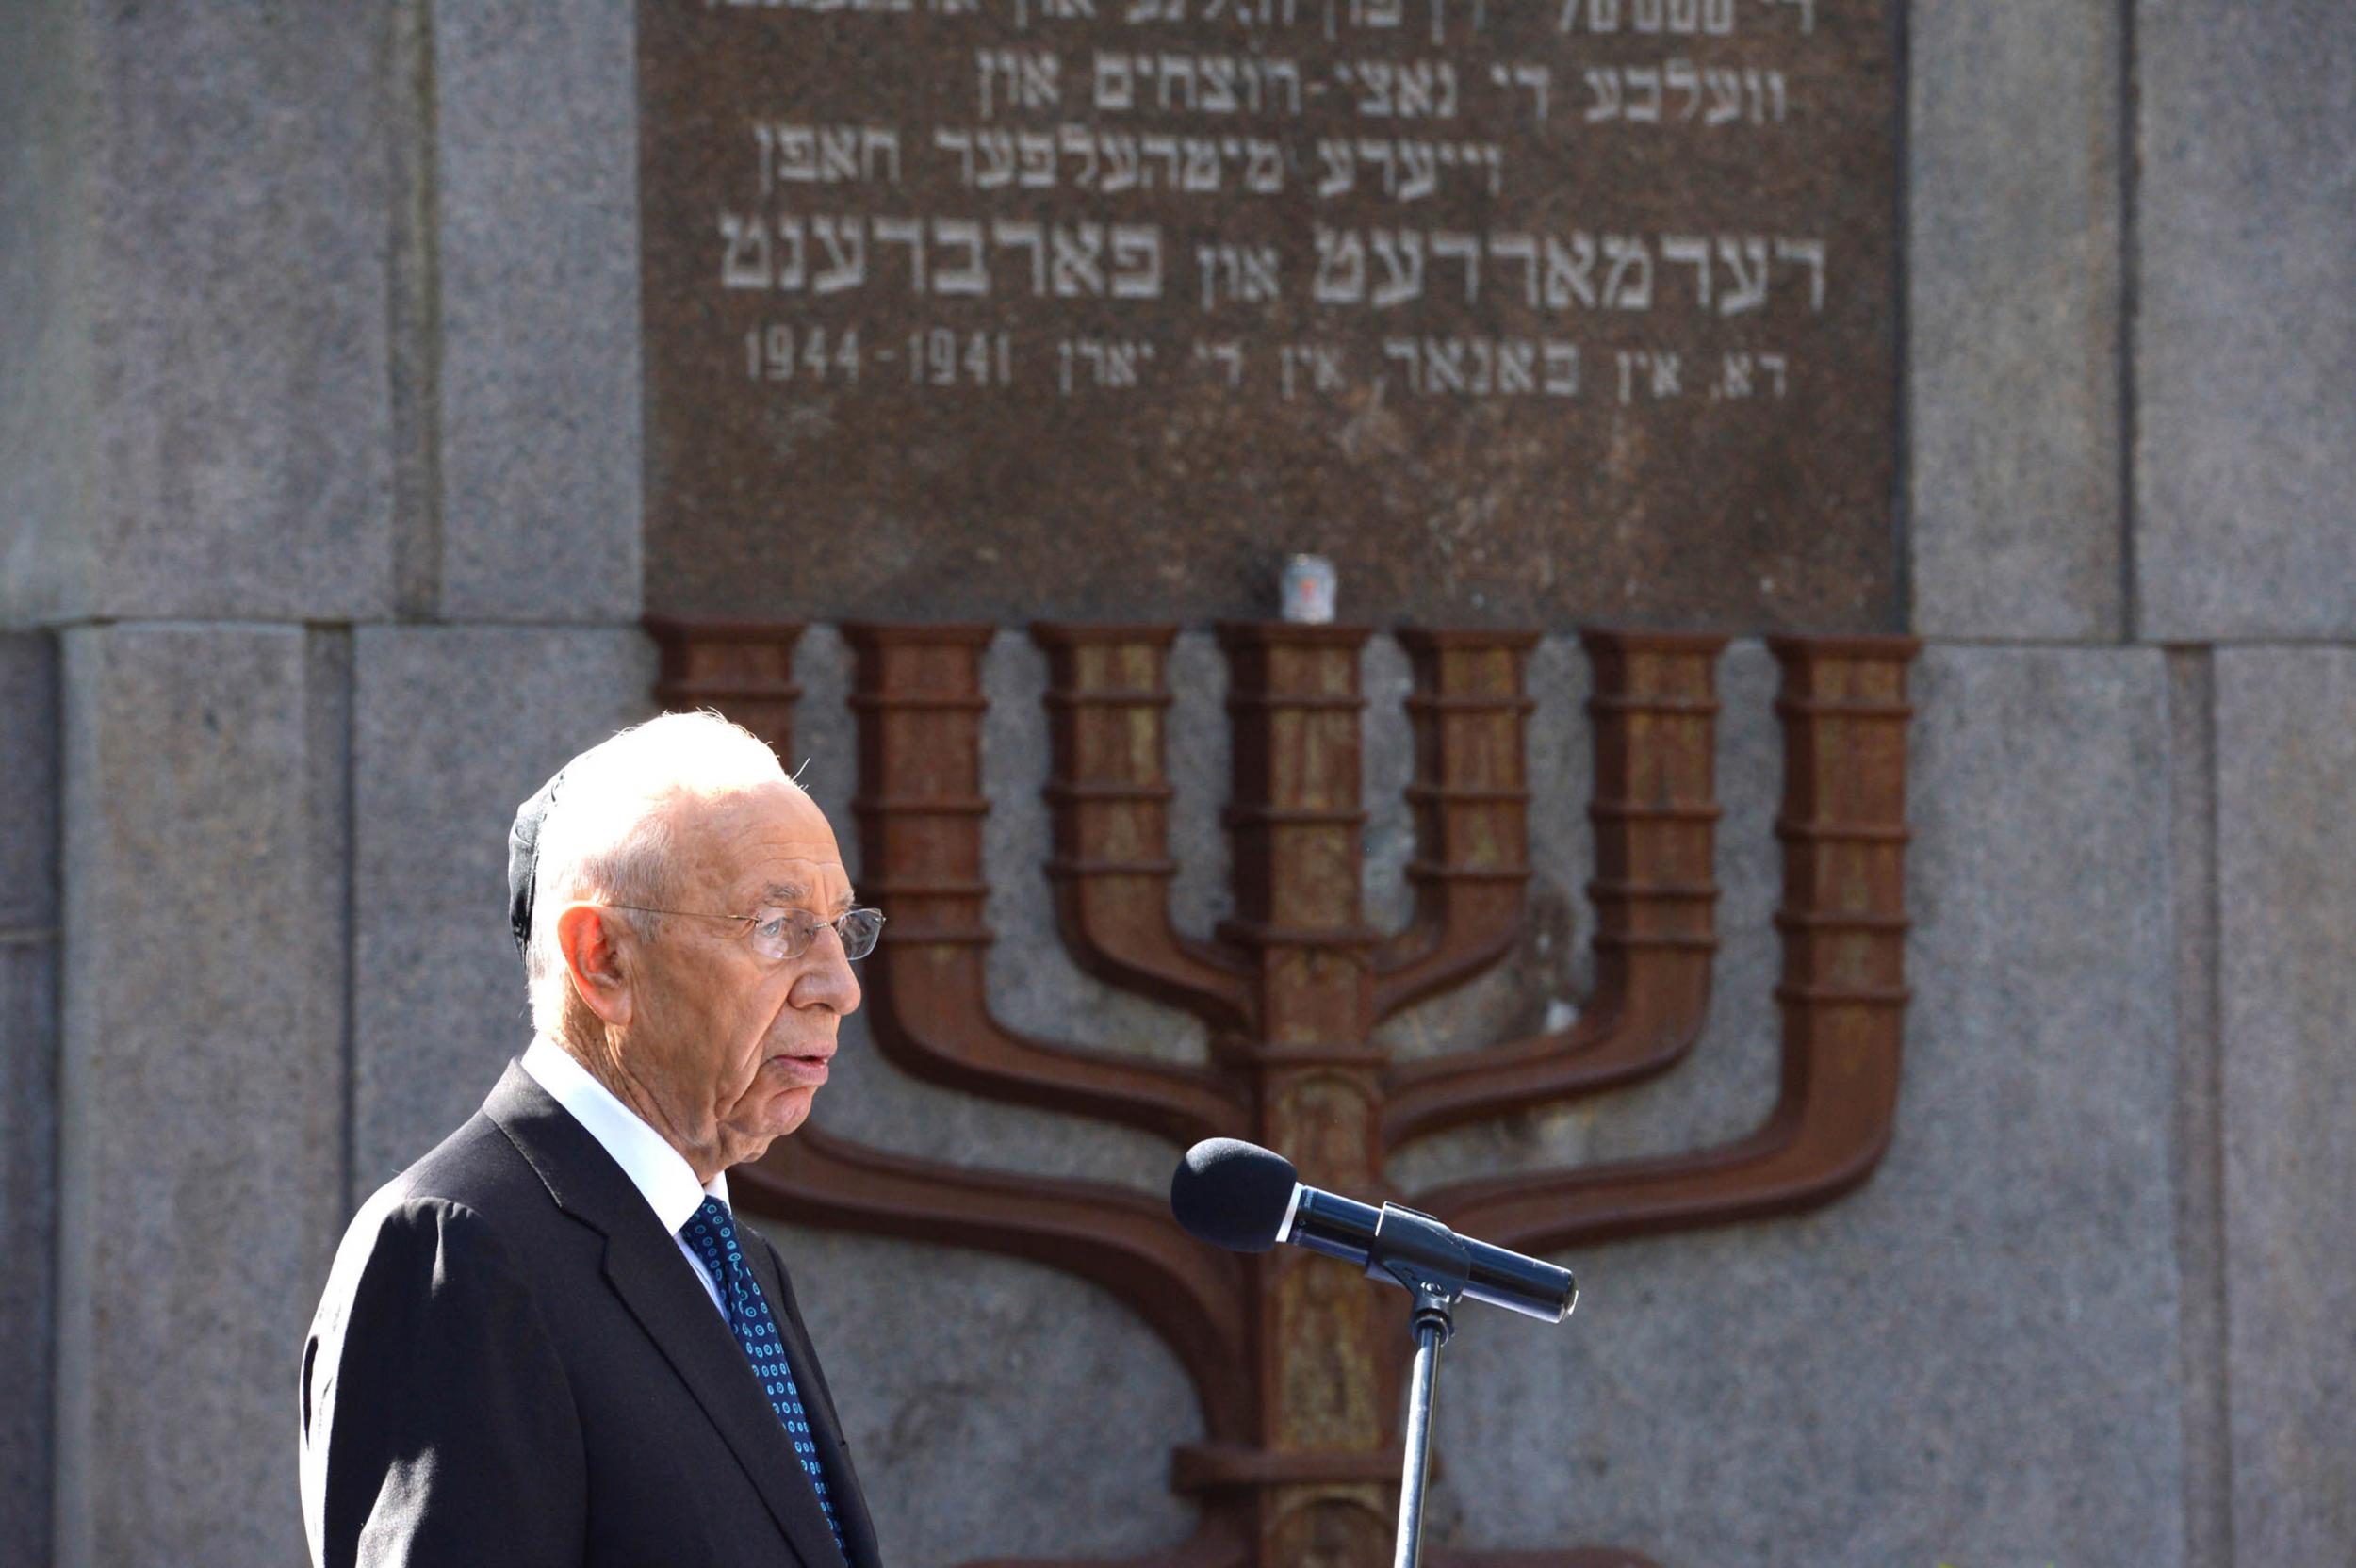 Israeli President Shimon Peres speaks during a remembrance ceremony in Lithuania